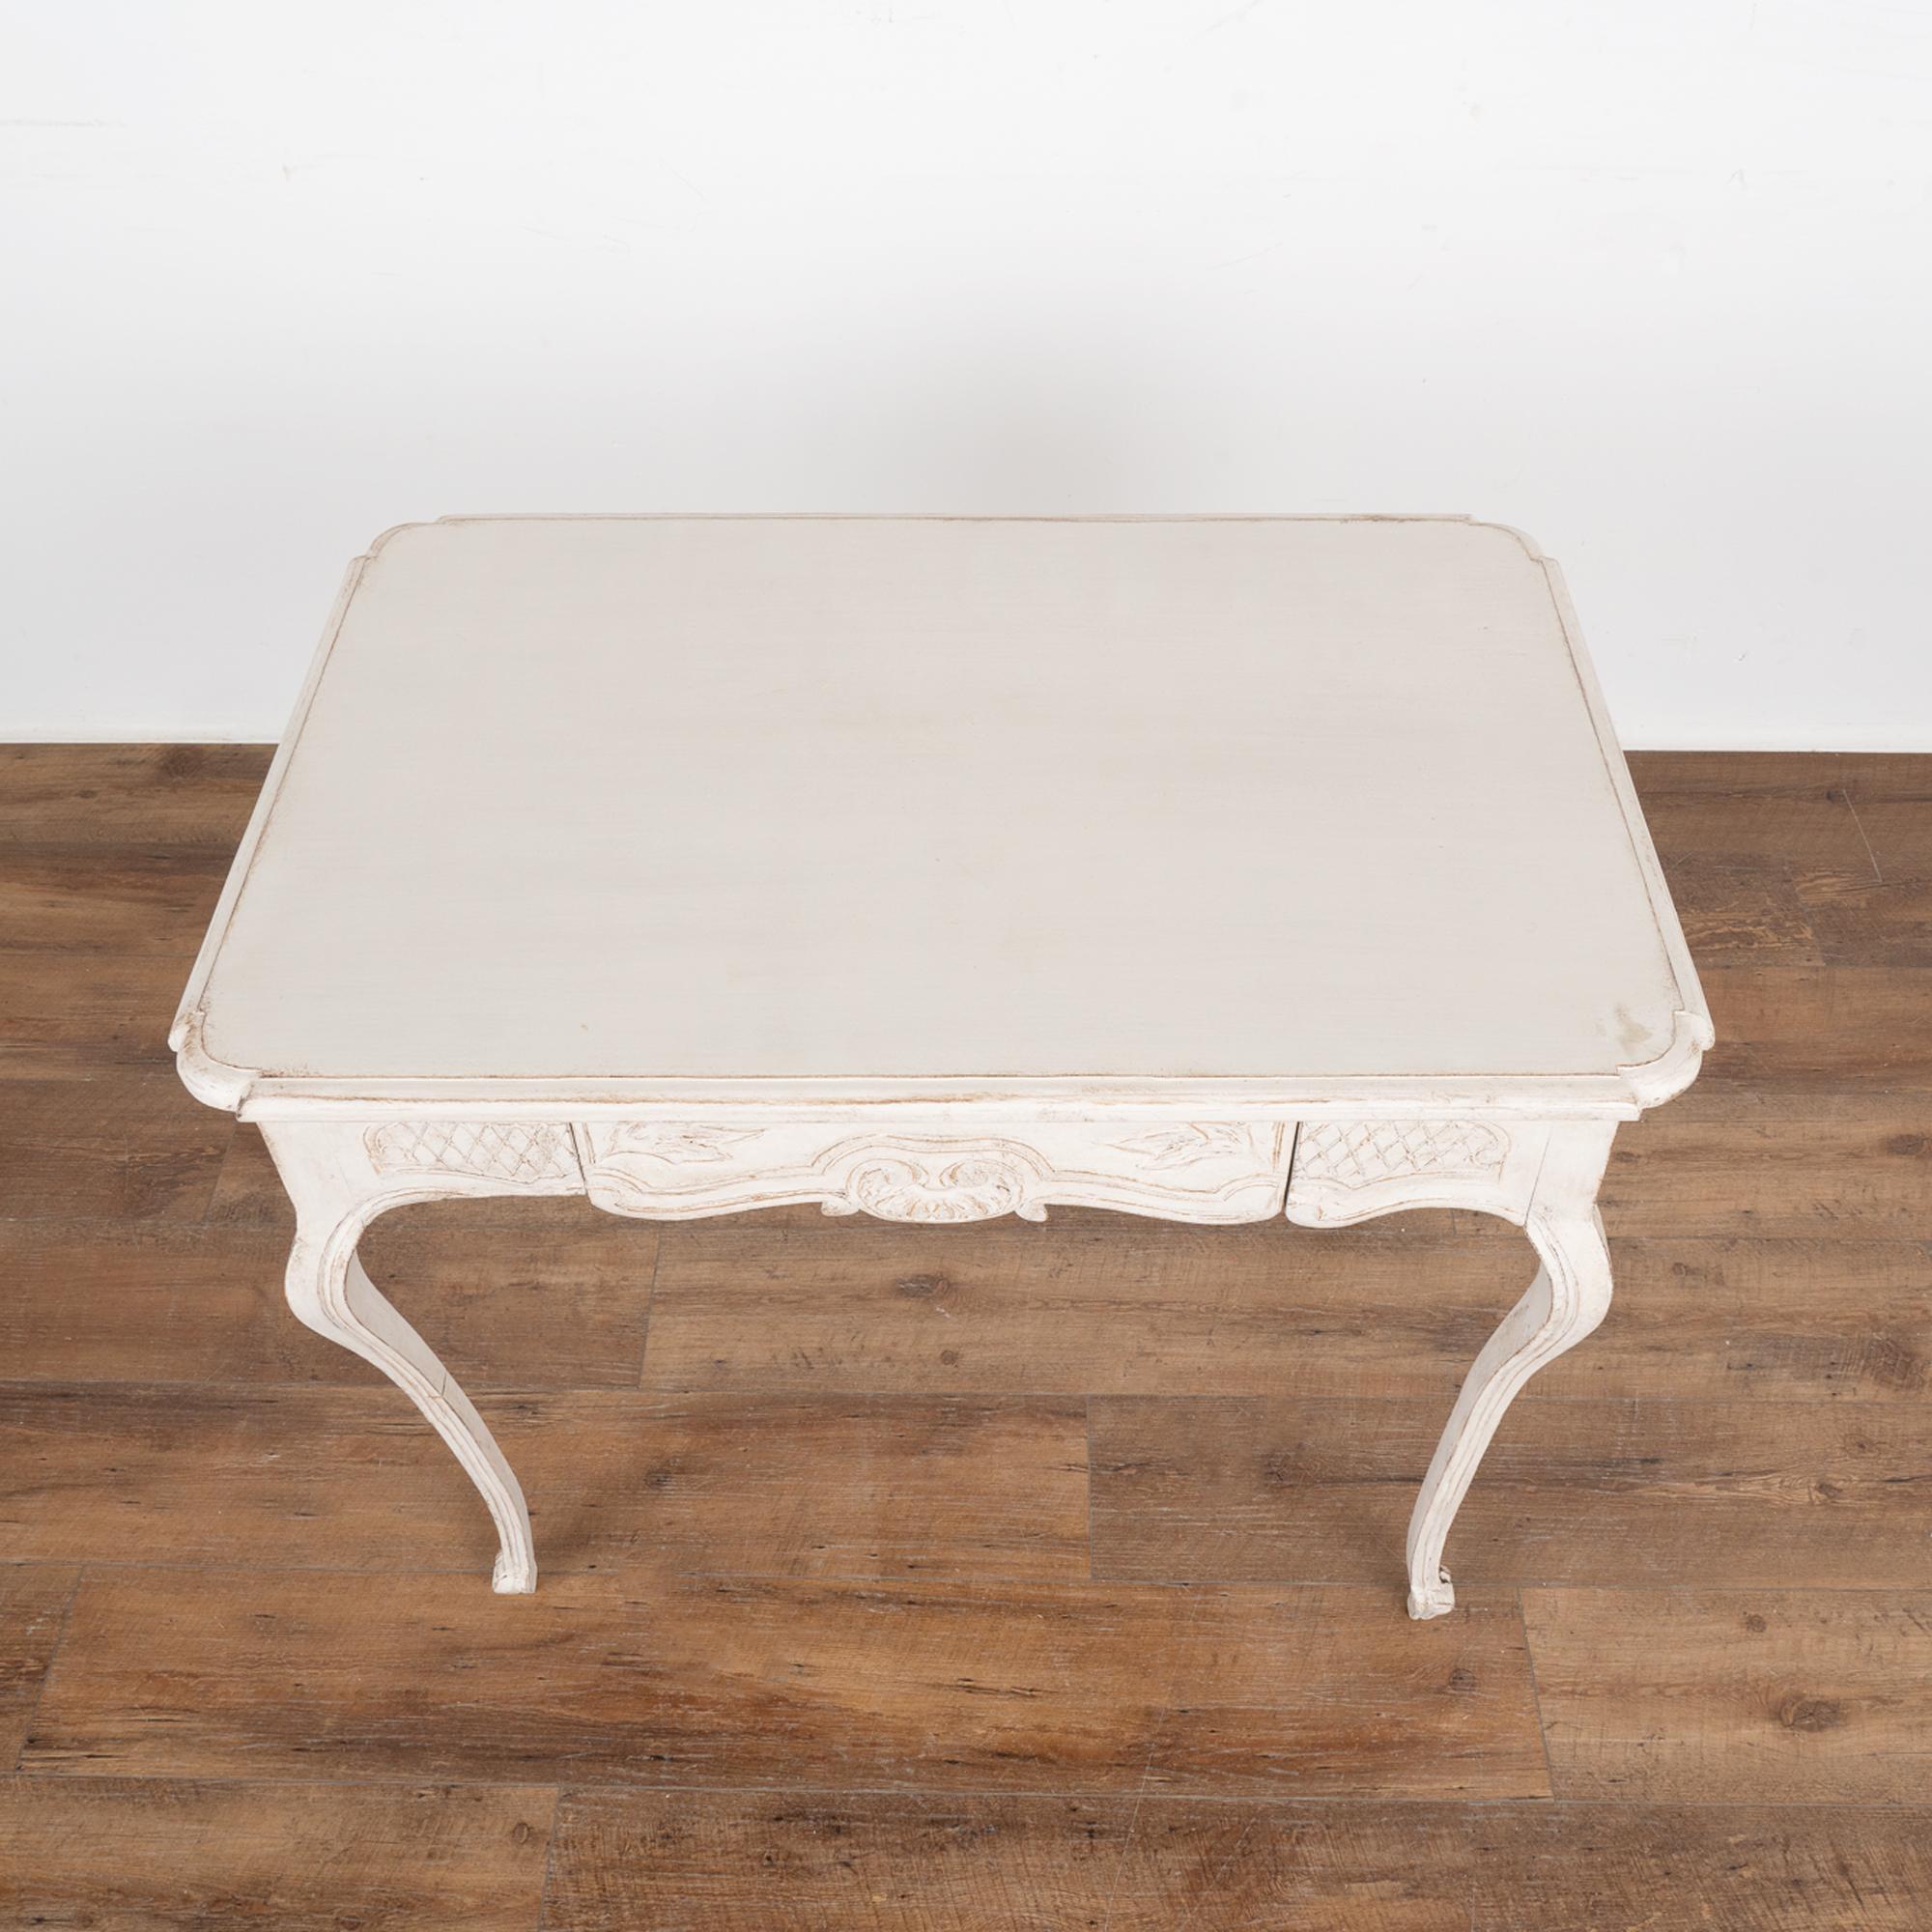 19th Century Gustavian White Painted Side Table With Drawer, Sweden circa 1820-40 For Sale